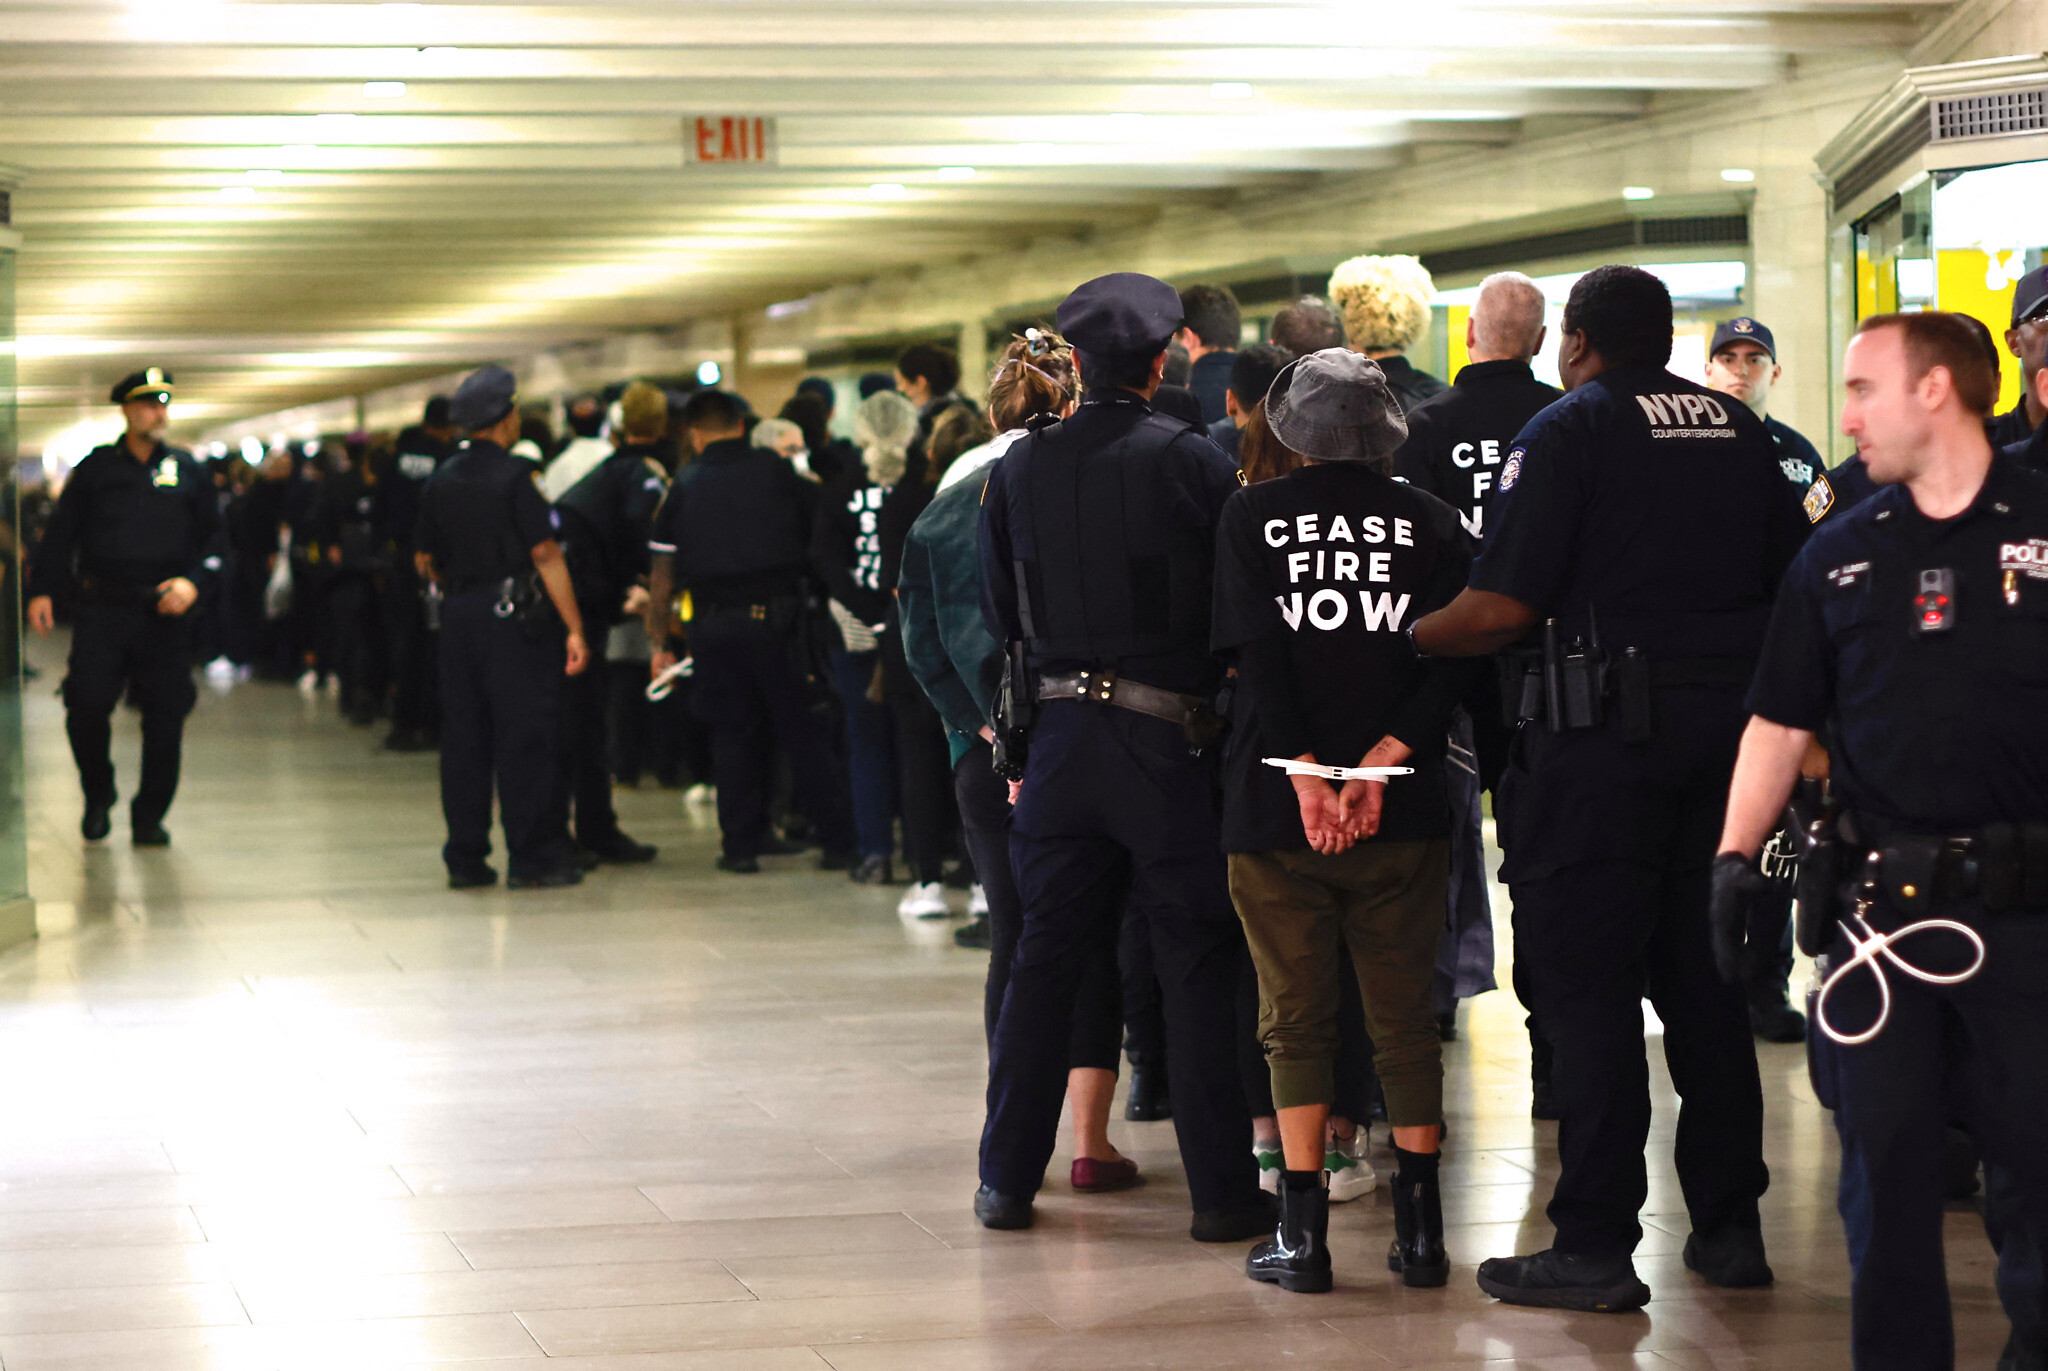 200 held as Jewish group shuts NYC's Grand Central calling for